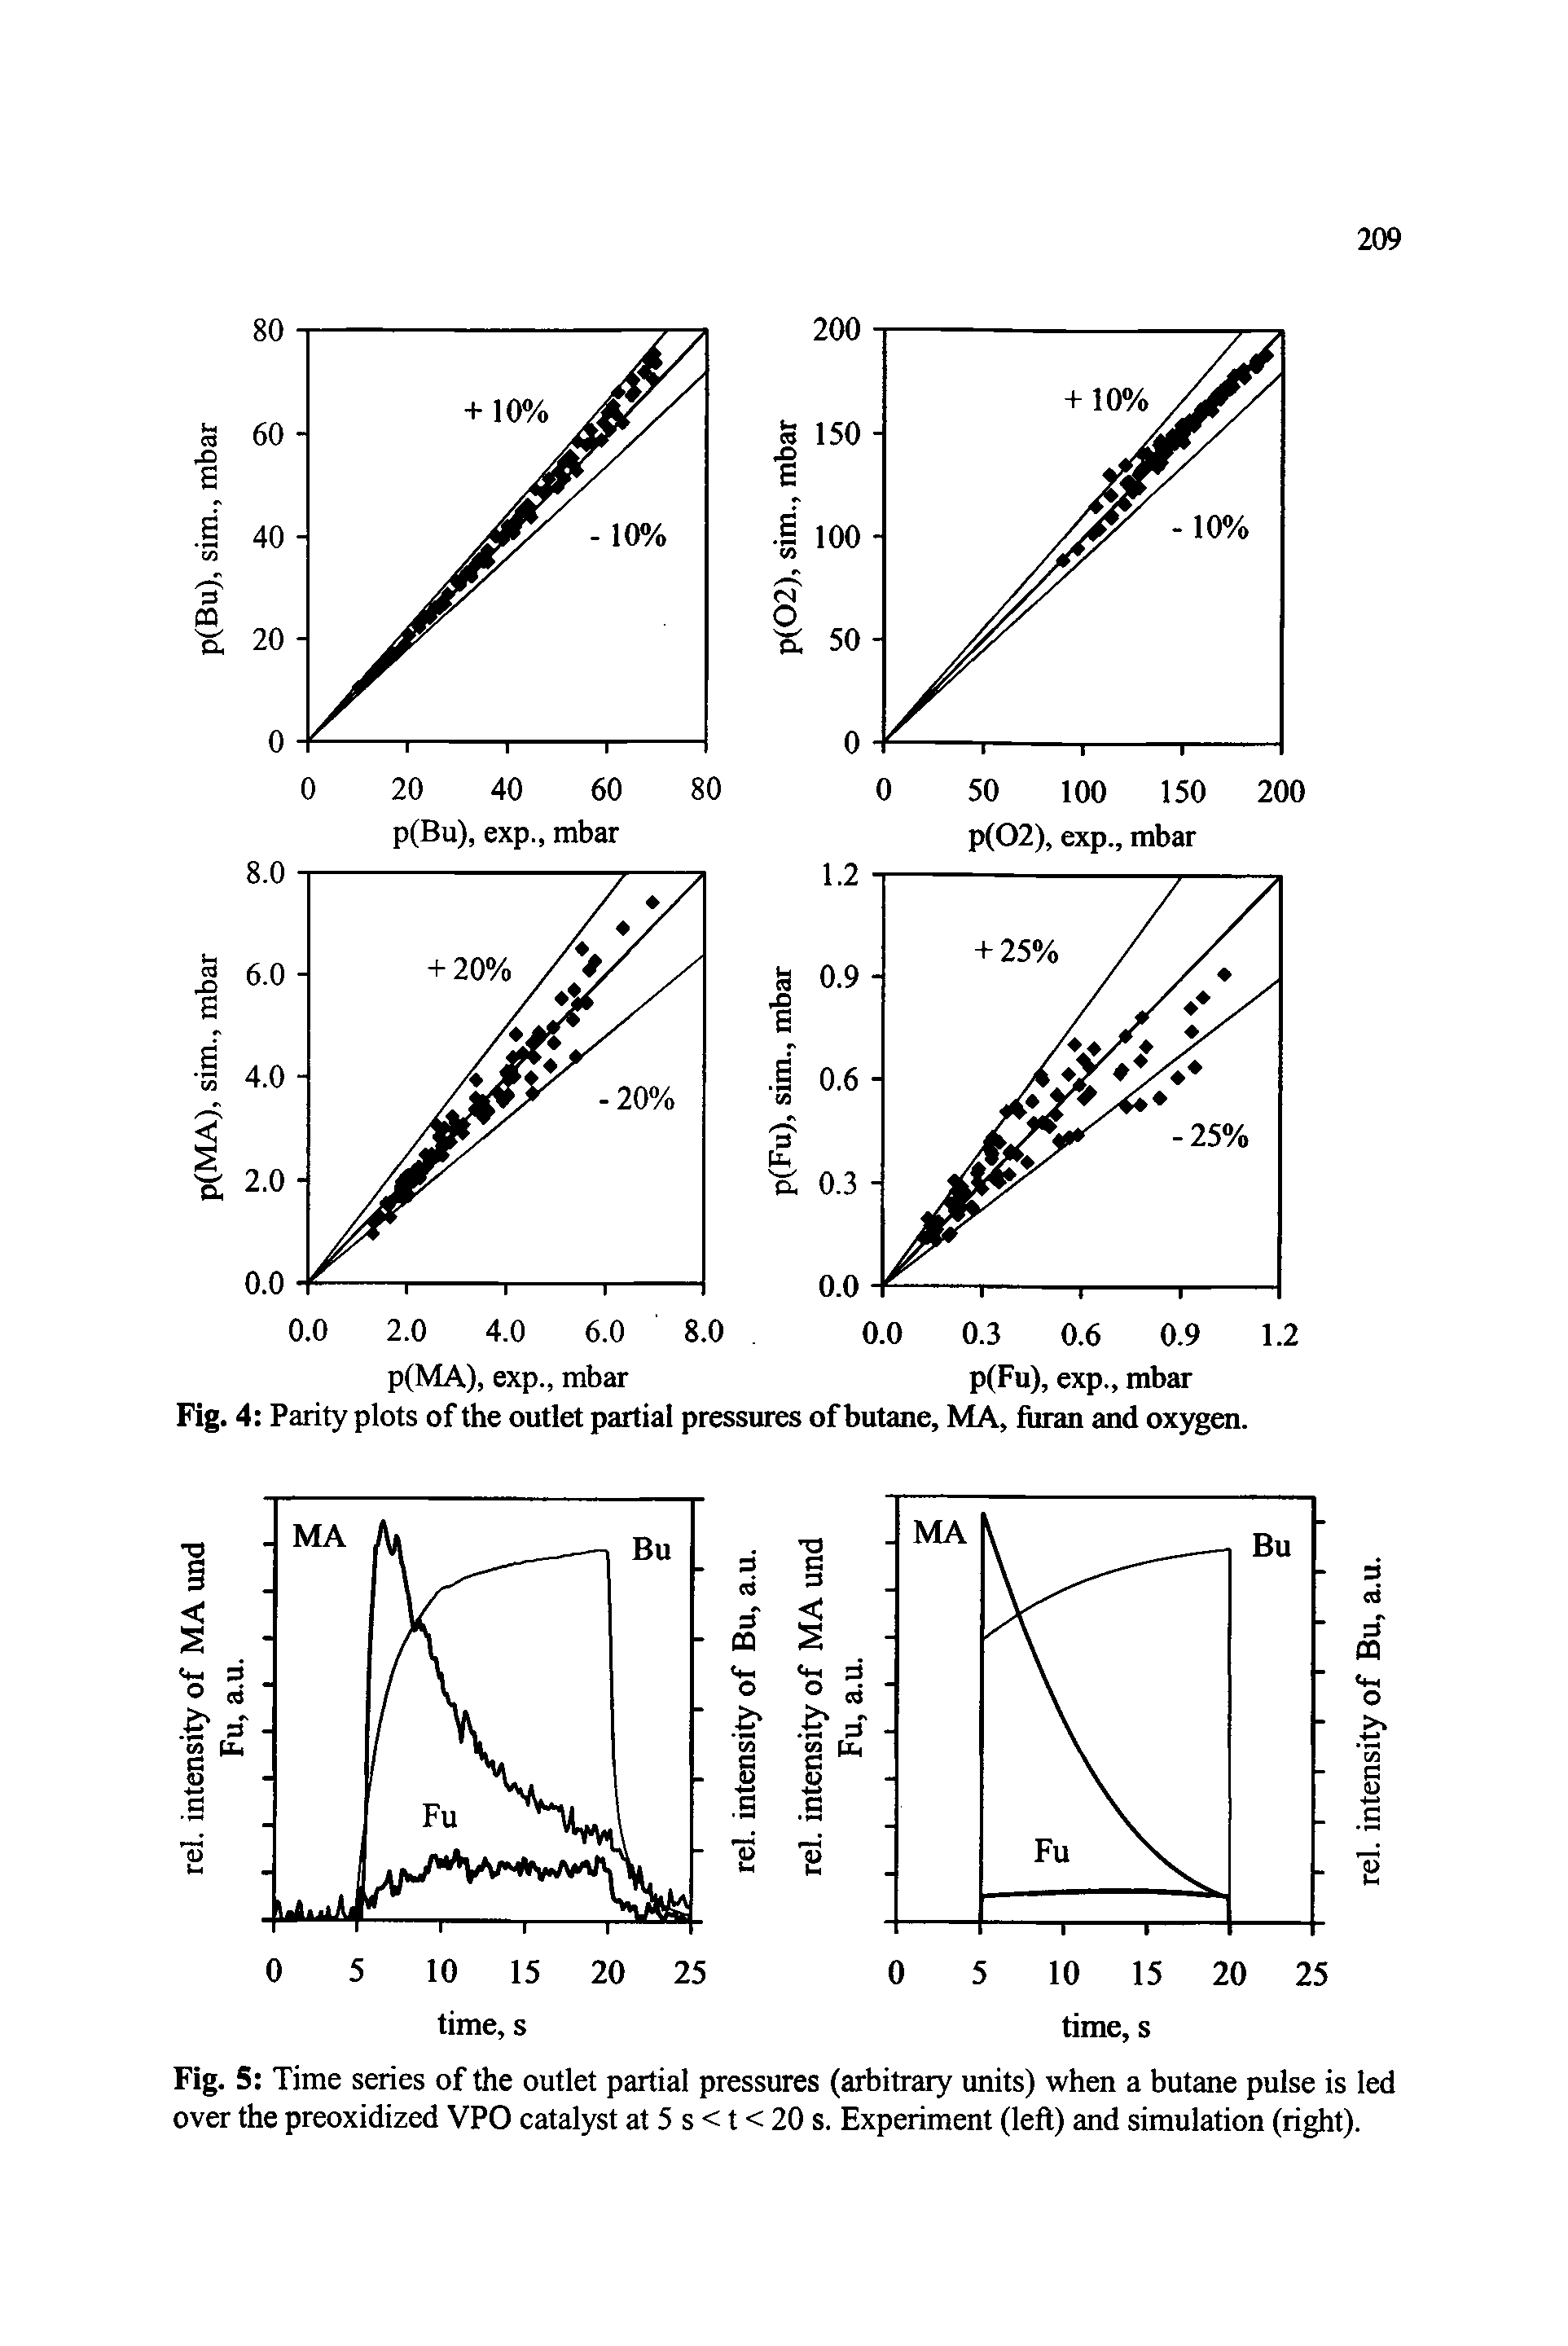 Fig. 5 Time series of the outlet partial pressures (arbitrary units) when a butane pulse is led over the preoxidized VPO catalyst at 5 s < t < 20 s. Experiment (left) and simulation (right).